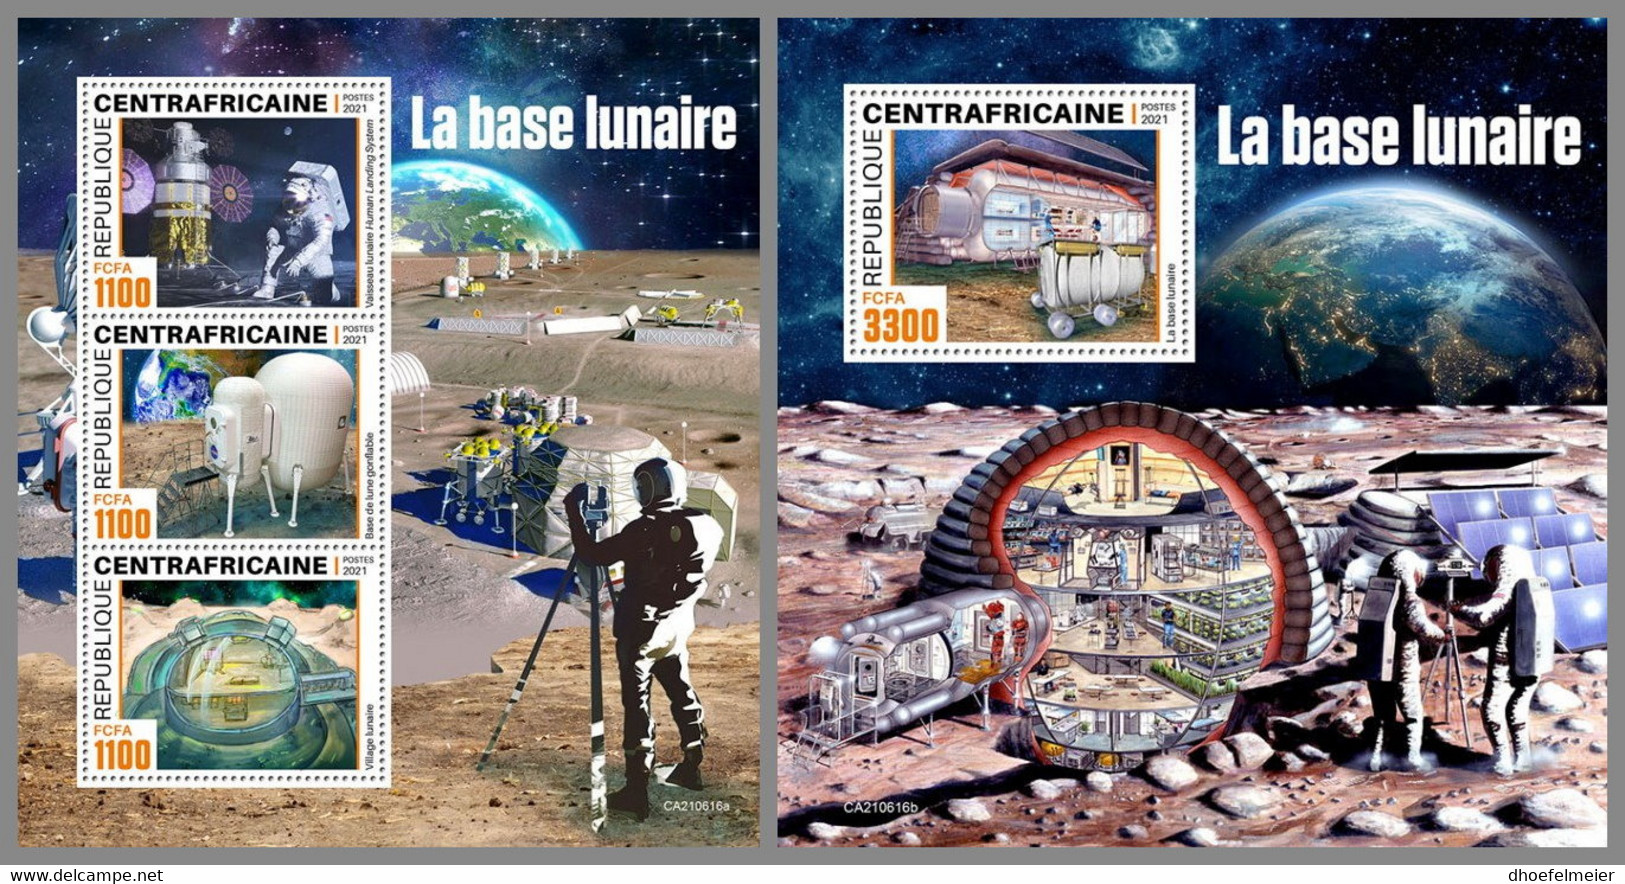 CENTRALAFRICA 2021 MNH Moonbase Mondbasis Space Raumfahrt M/S+S/S - OFFICIAL ISSUE - DHQ2202 - Africa